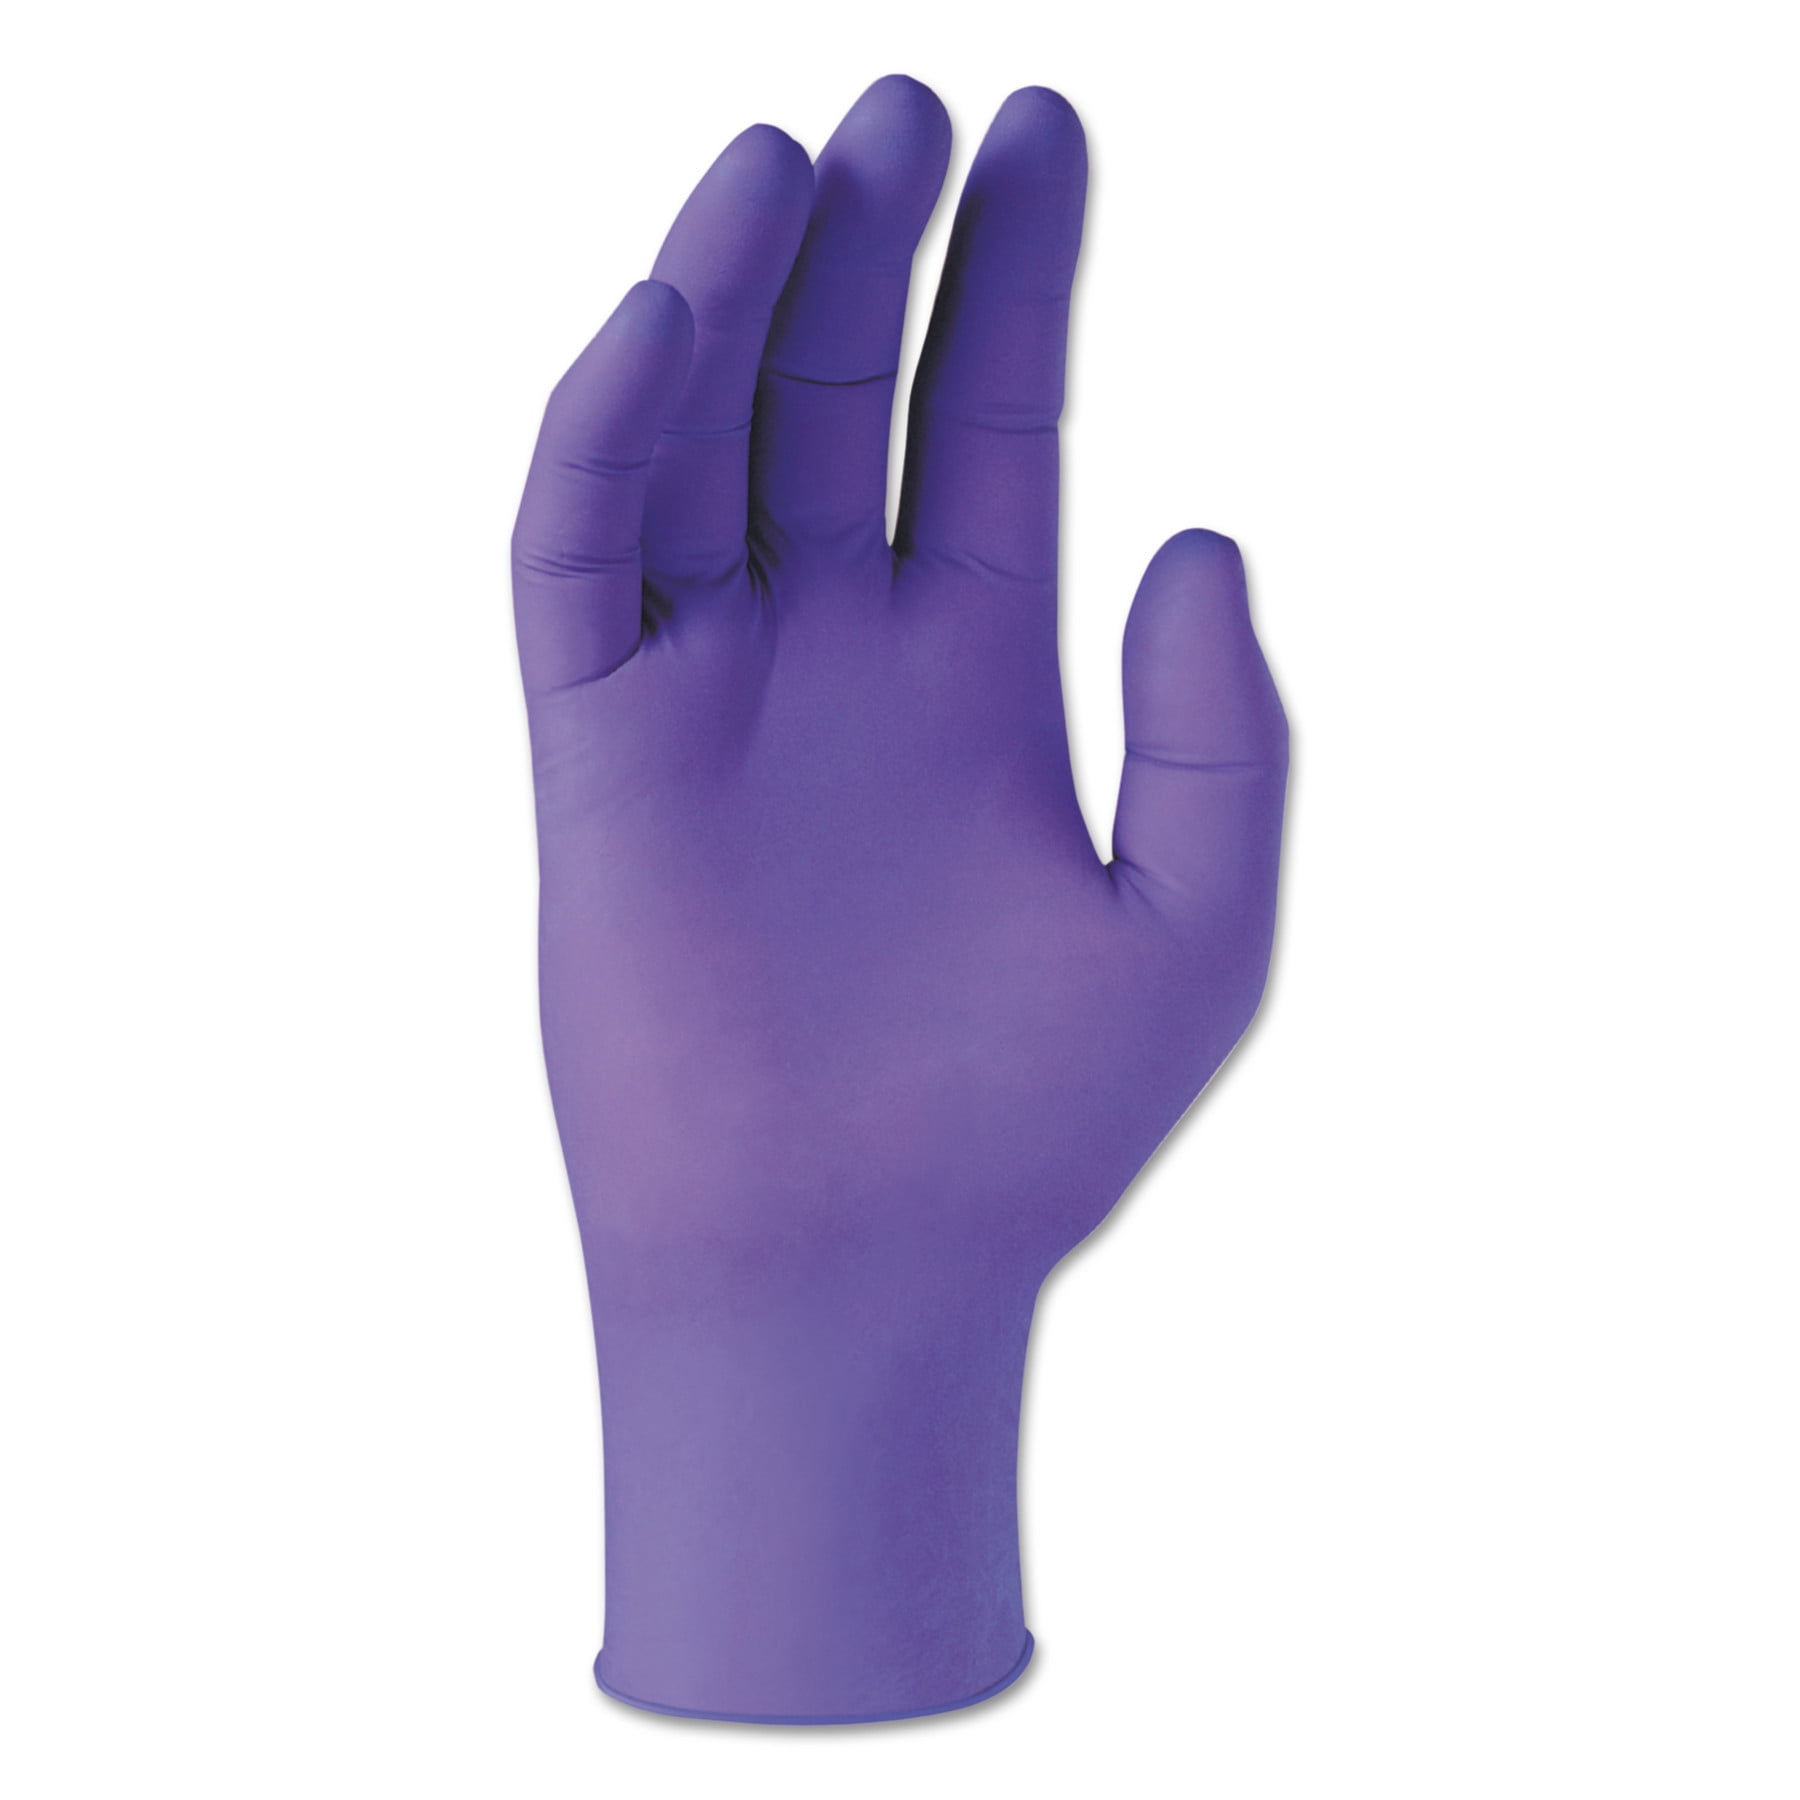 Kimberly Clark/Halyard Lavender Nitrile Exam GLoves Size X-SMALL-FREE SHIPPING 